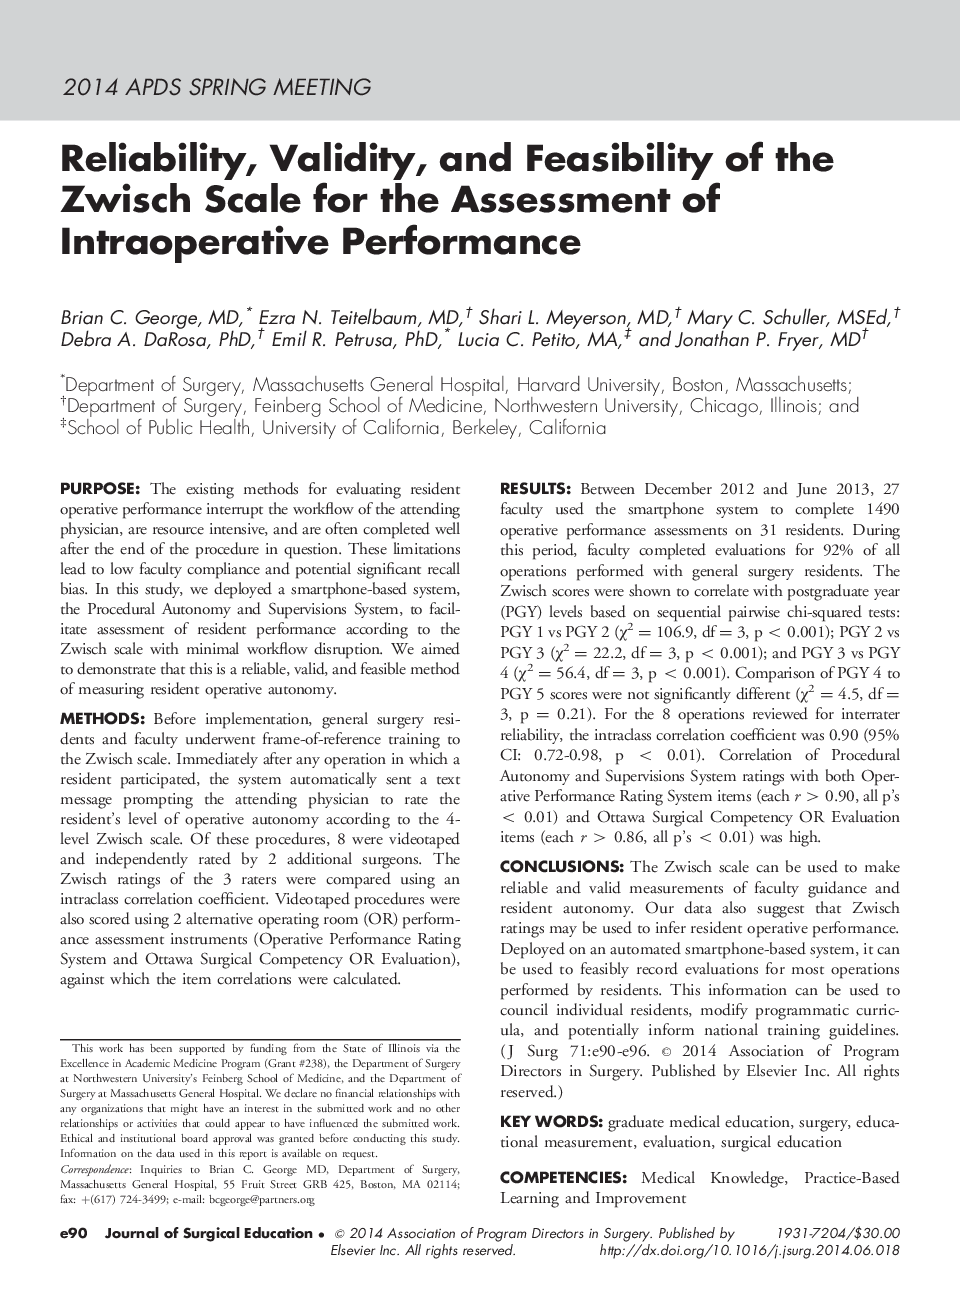 Reliability, Validity, and Feasibility of the Zwisch Scale for the Assessment of Intraoperative Performance 